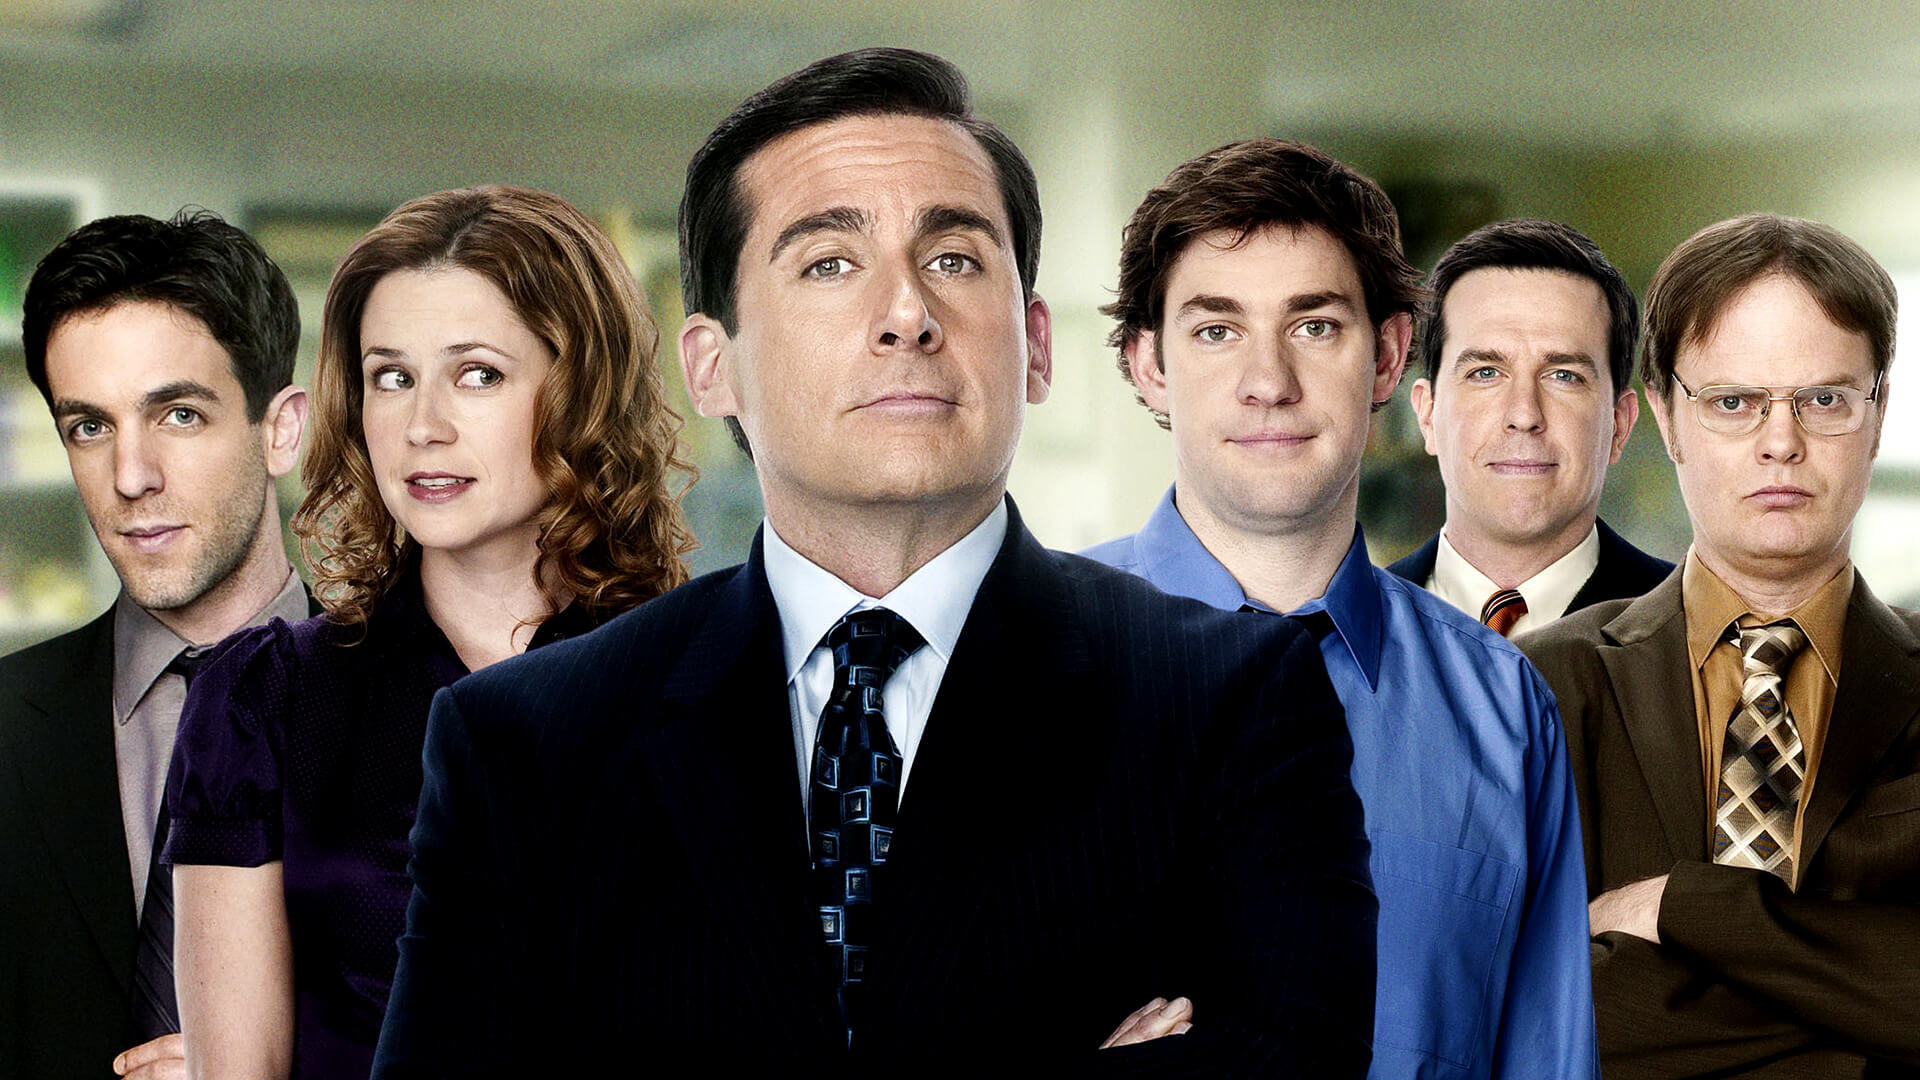 High resolution The Office (US) full hd background ID:45984 for desktop